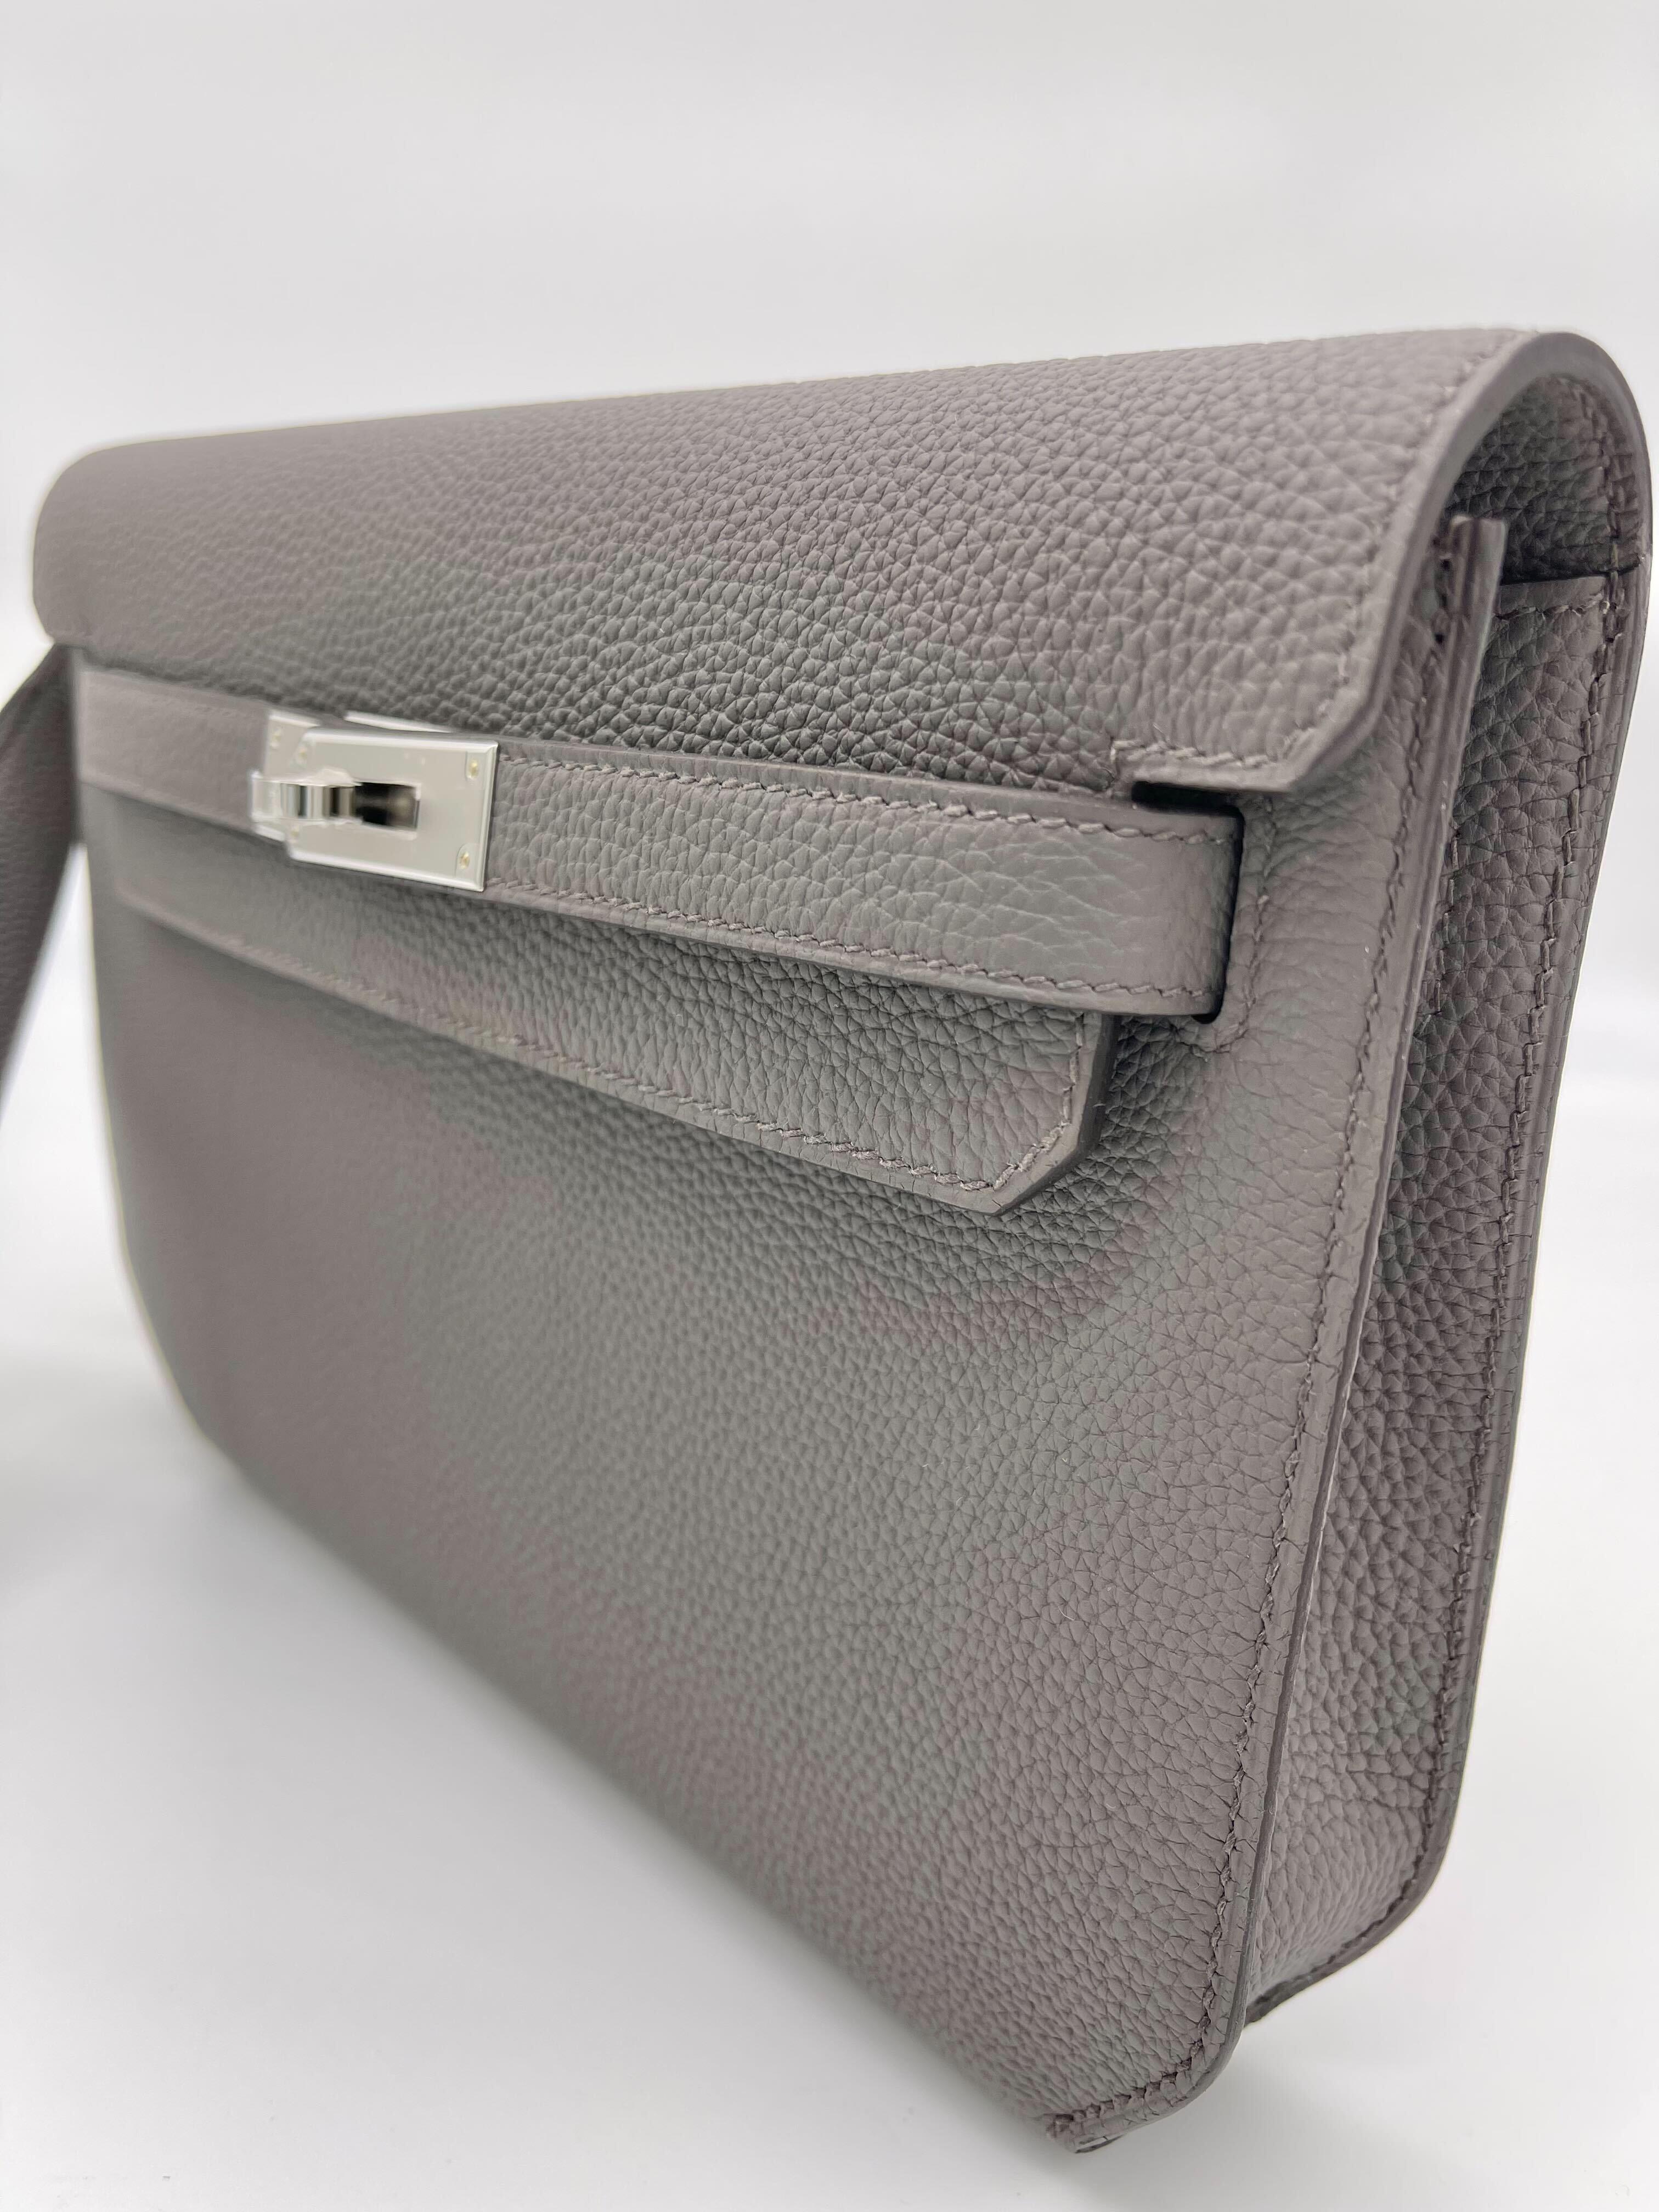 Kelly Depeches 25 Togo Calfskin Clutch 8F Gris Etain, Palladium Hardware

Condition: Brand New
Measurements: 8.5 in x 7.5 in x 1.25 in
Material: Togo Leather
Hardware: Palladium plated

*Comes with full original packaging.
*Full plastic on hardware.